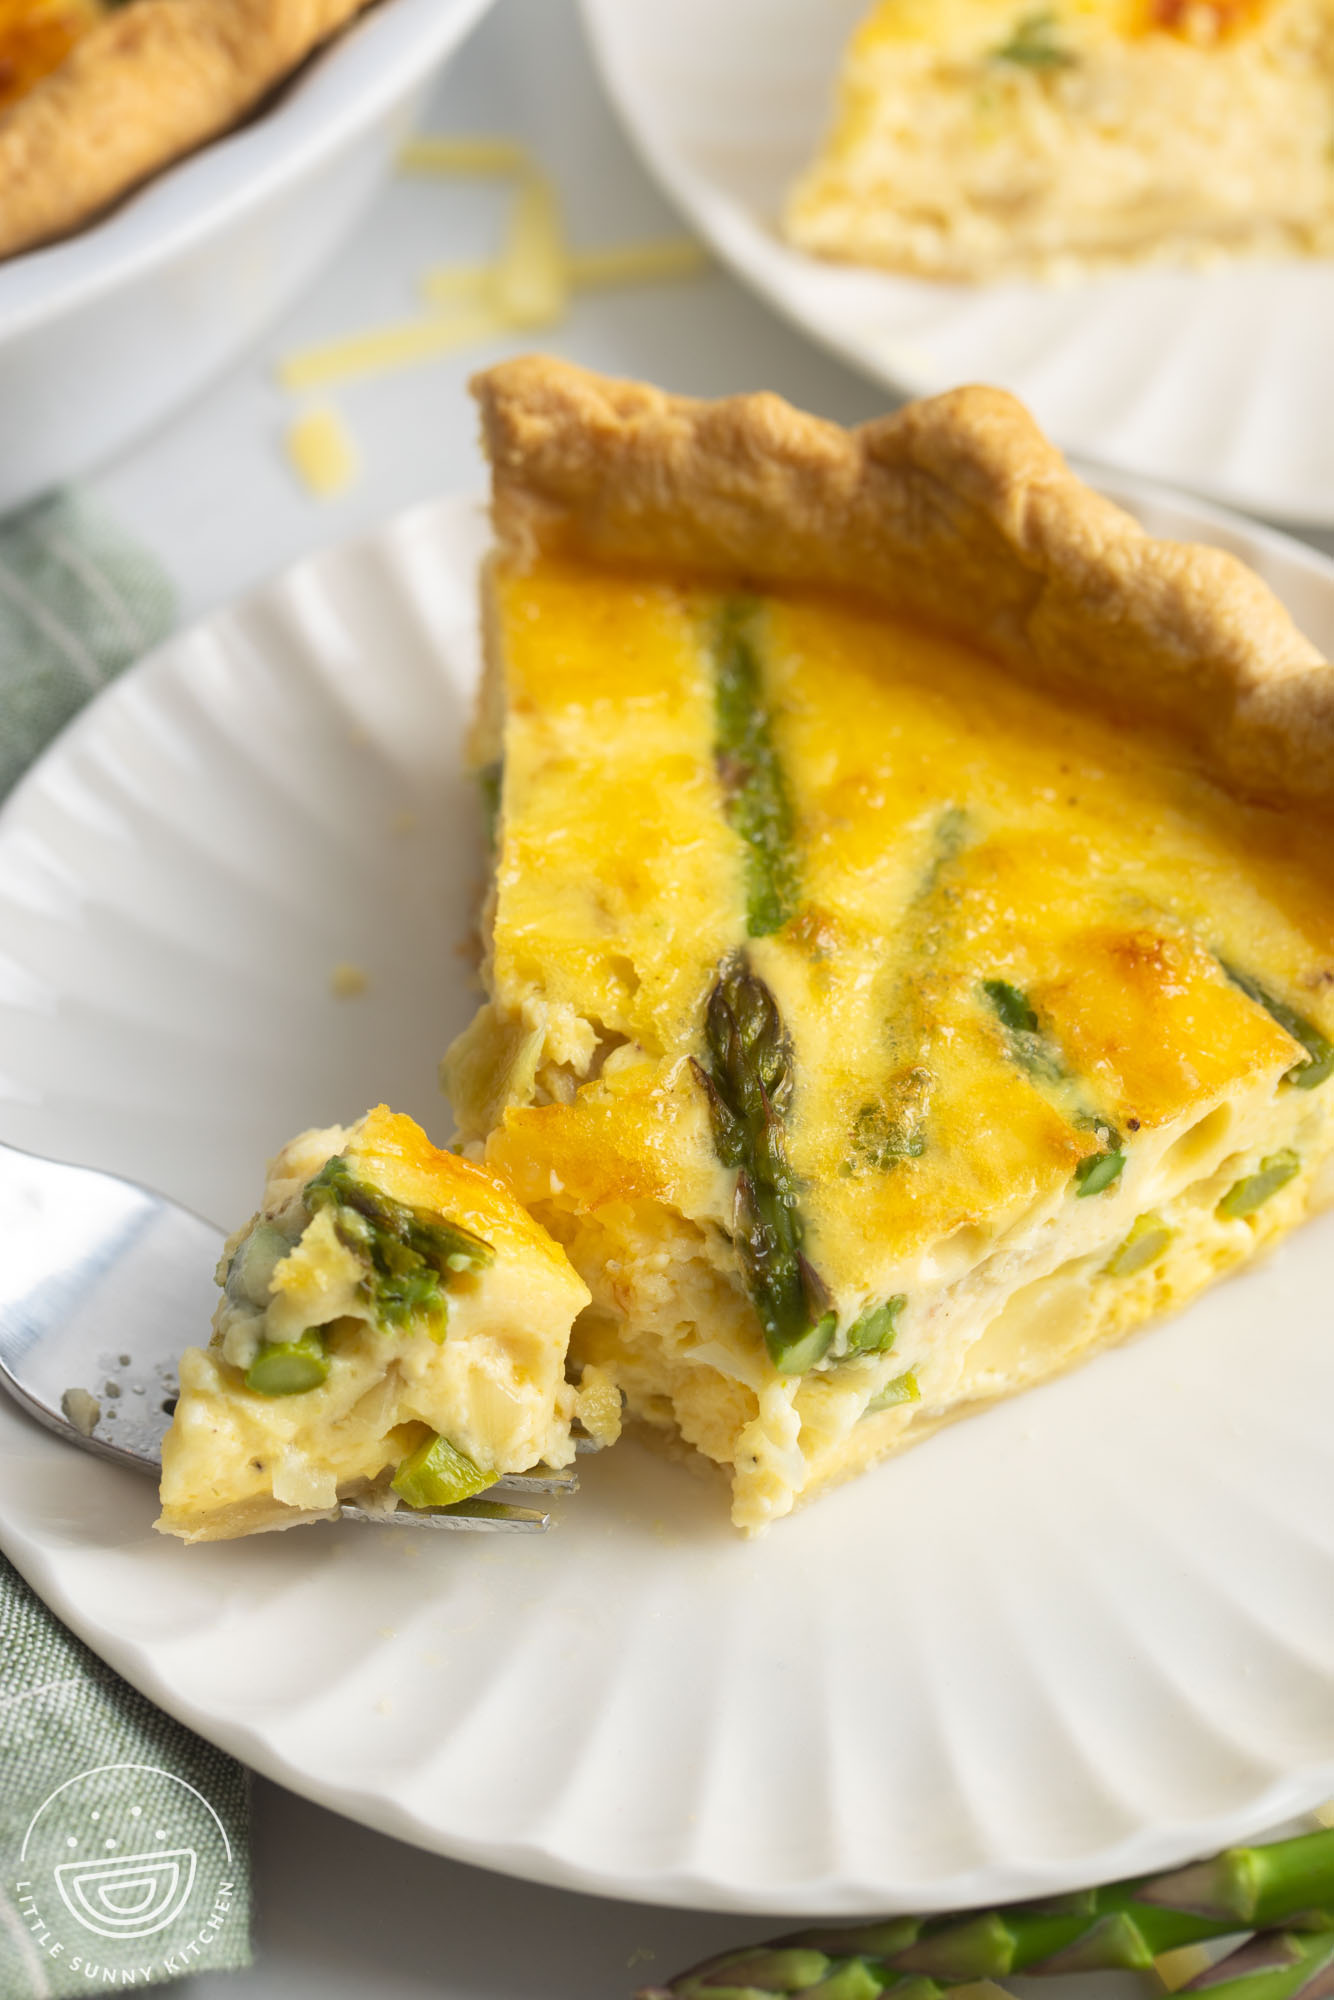 one wedge shaped slice of quiche with asparagus on a small white fluted plate. A fork is taking a bite.